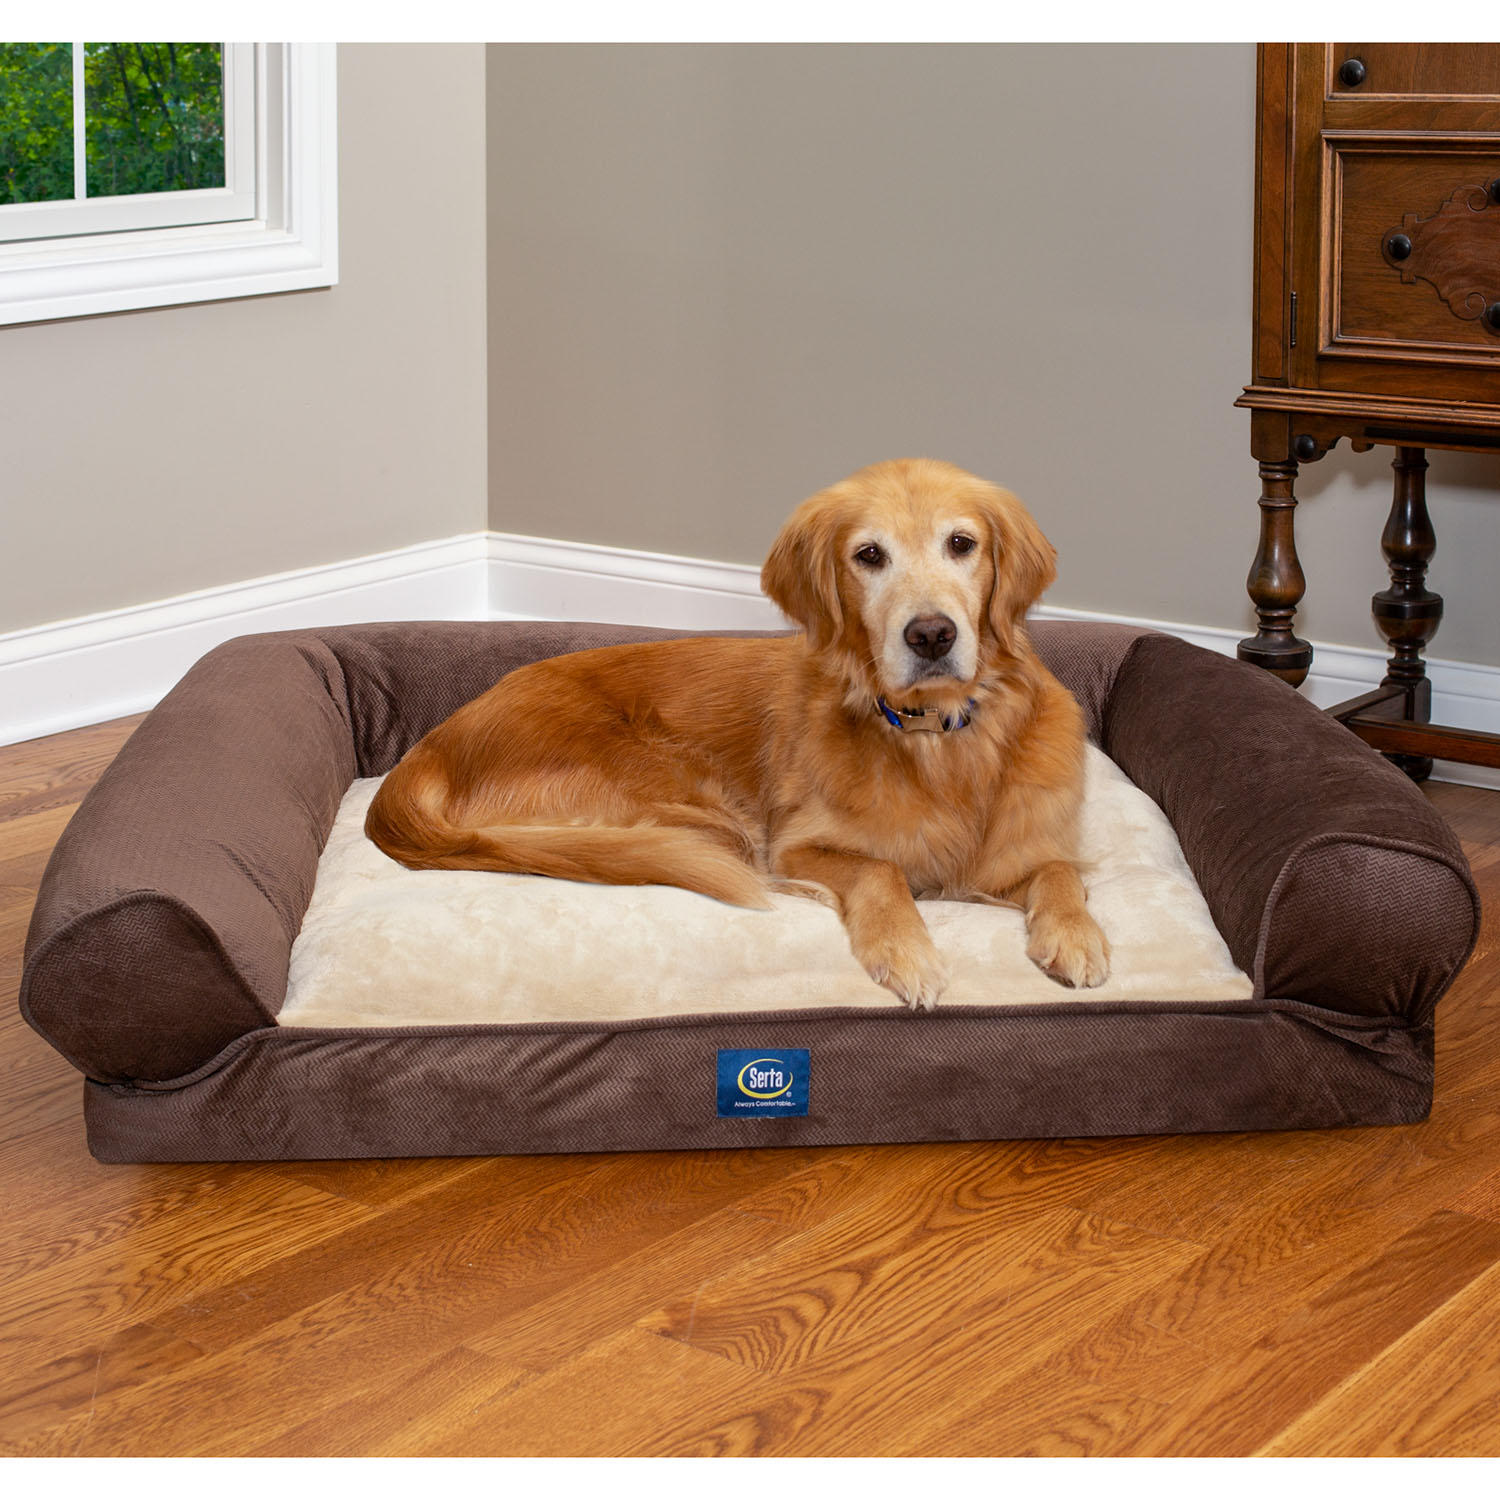 Serta XL Round Bolster Couch Pet Bed, 40'x 30' (Brown)